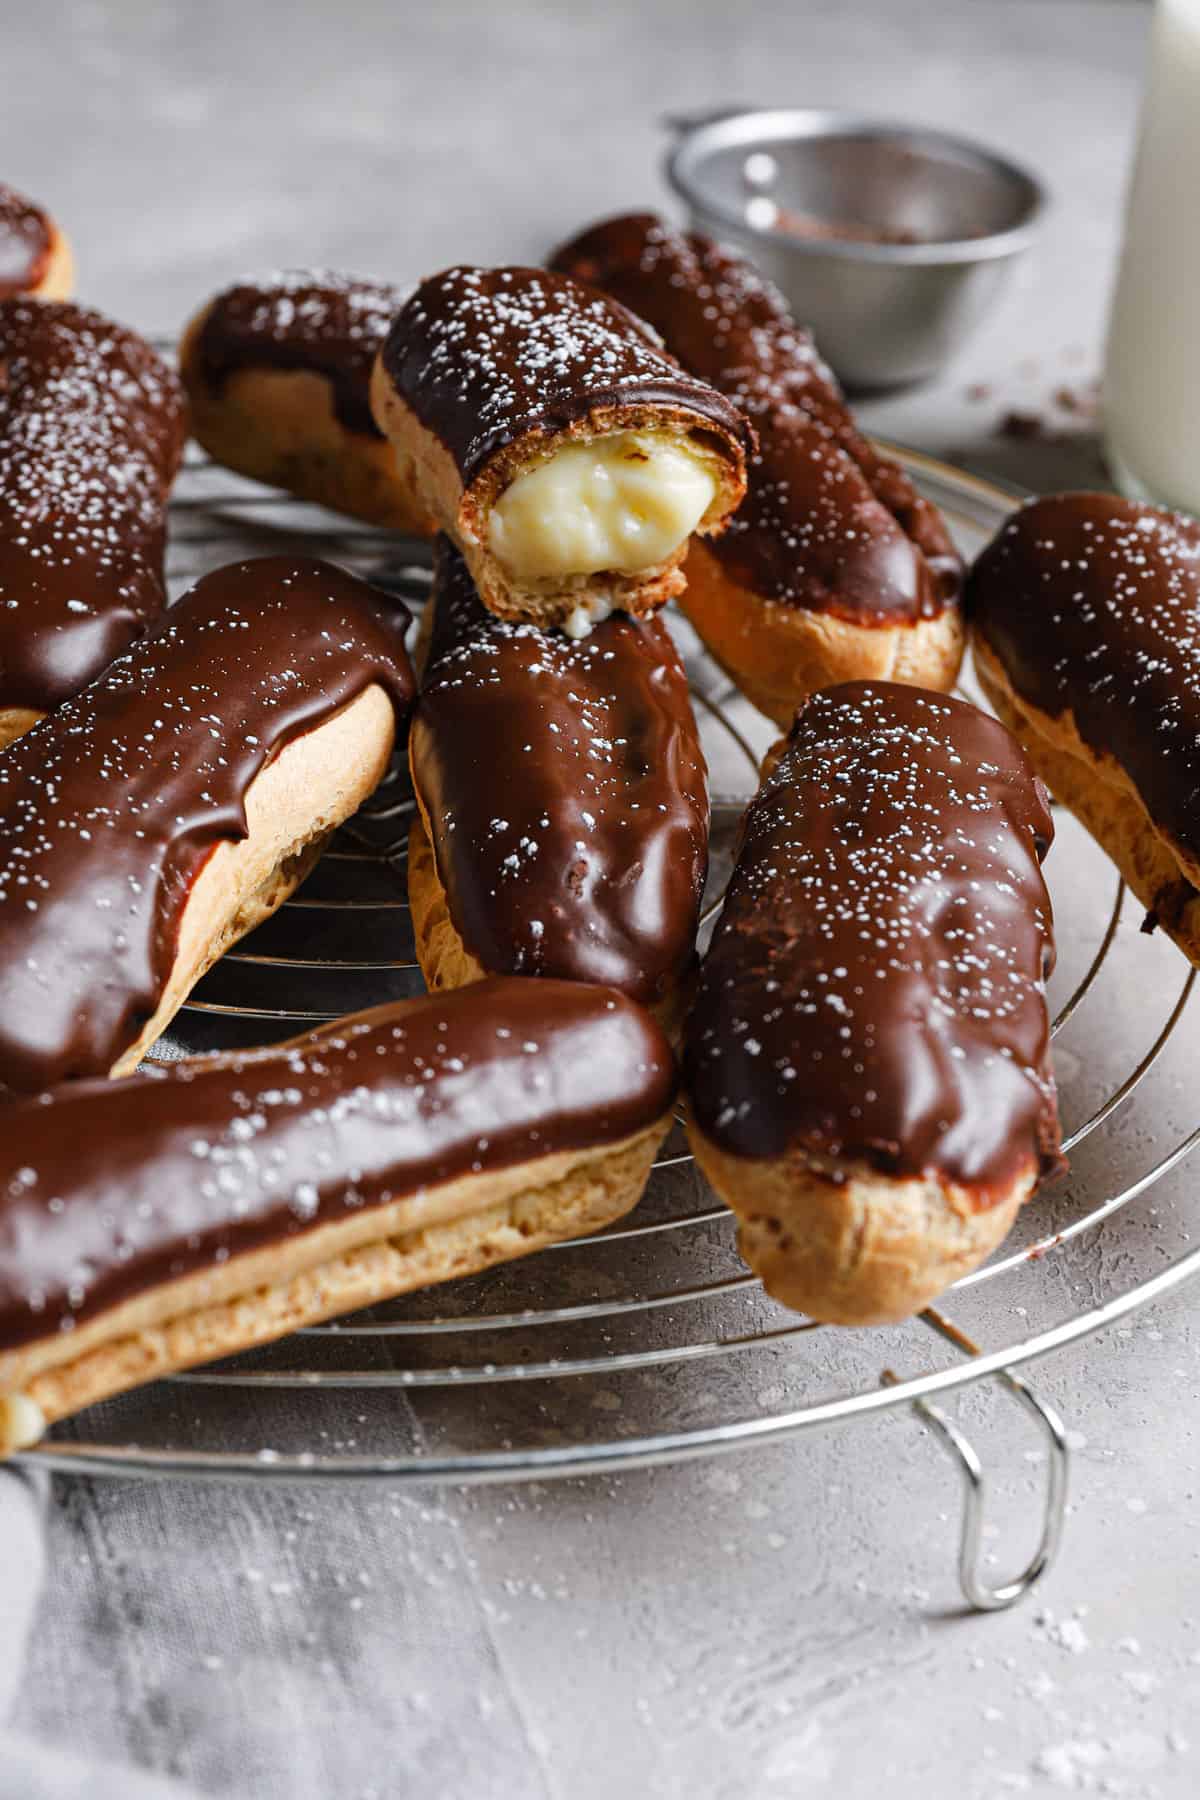 From the side, eclairs cooling on a wire rack with one eclair showing the inside of the pastry.